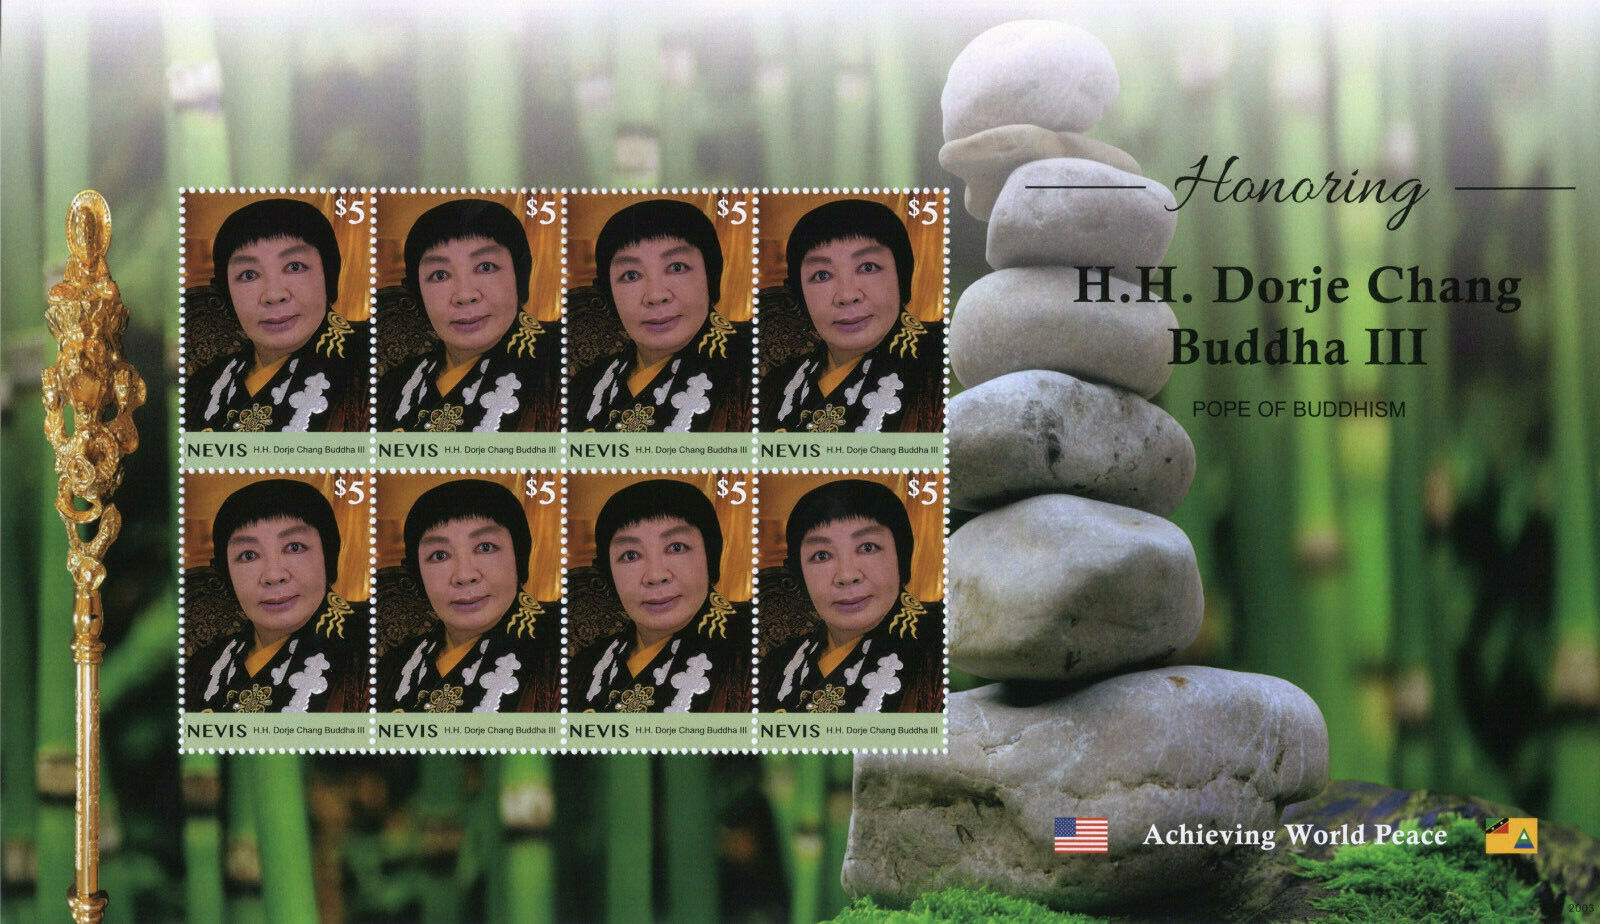 Nevis 2020 MNH Religion Stamps HH Dorje Chang Buddha III Buddhism Famous People 8v M/S